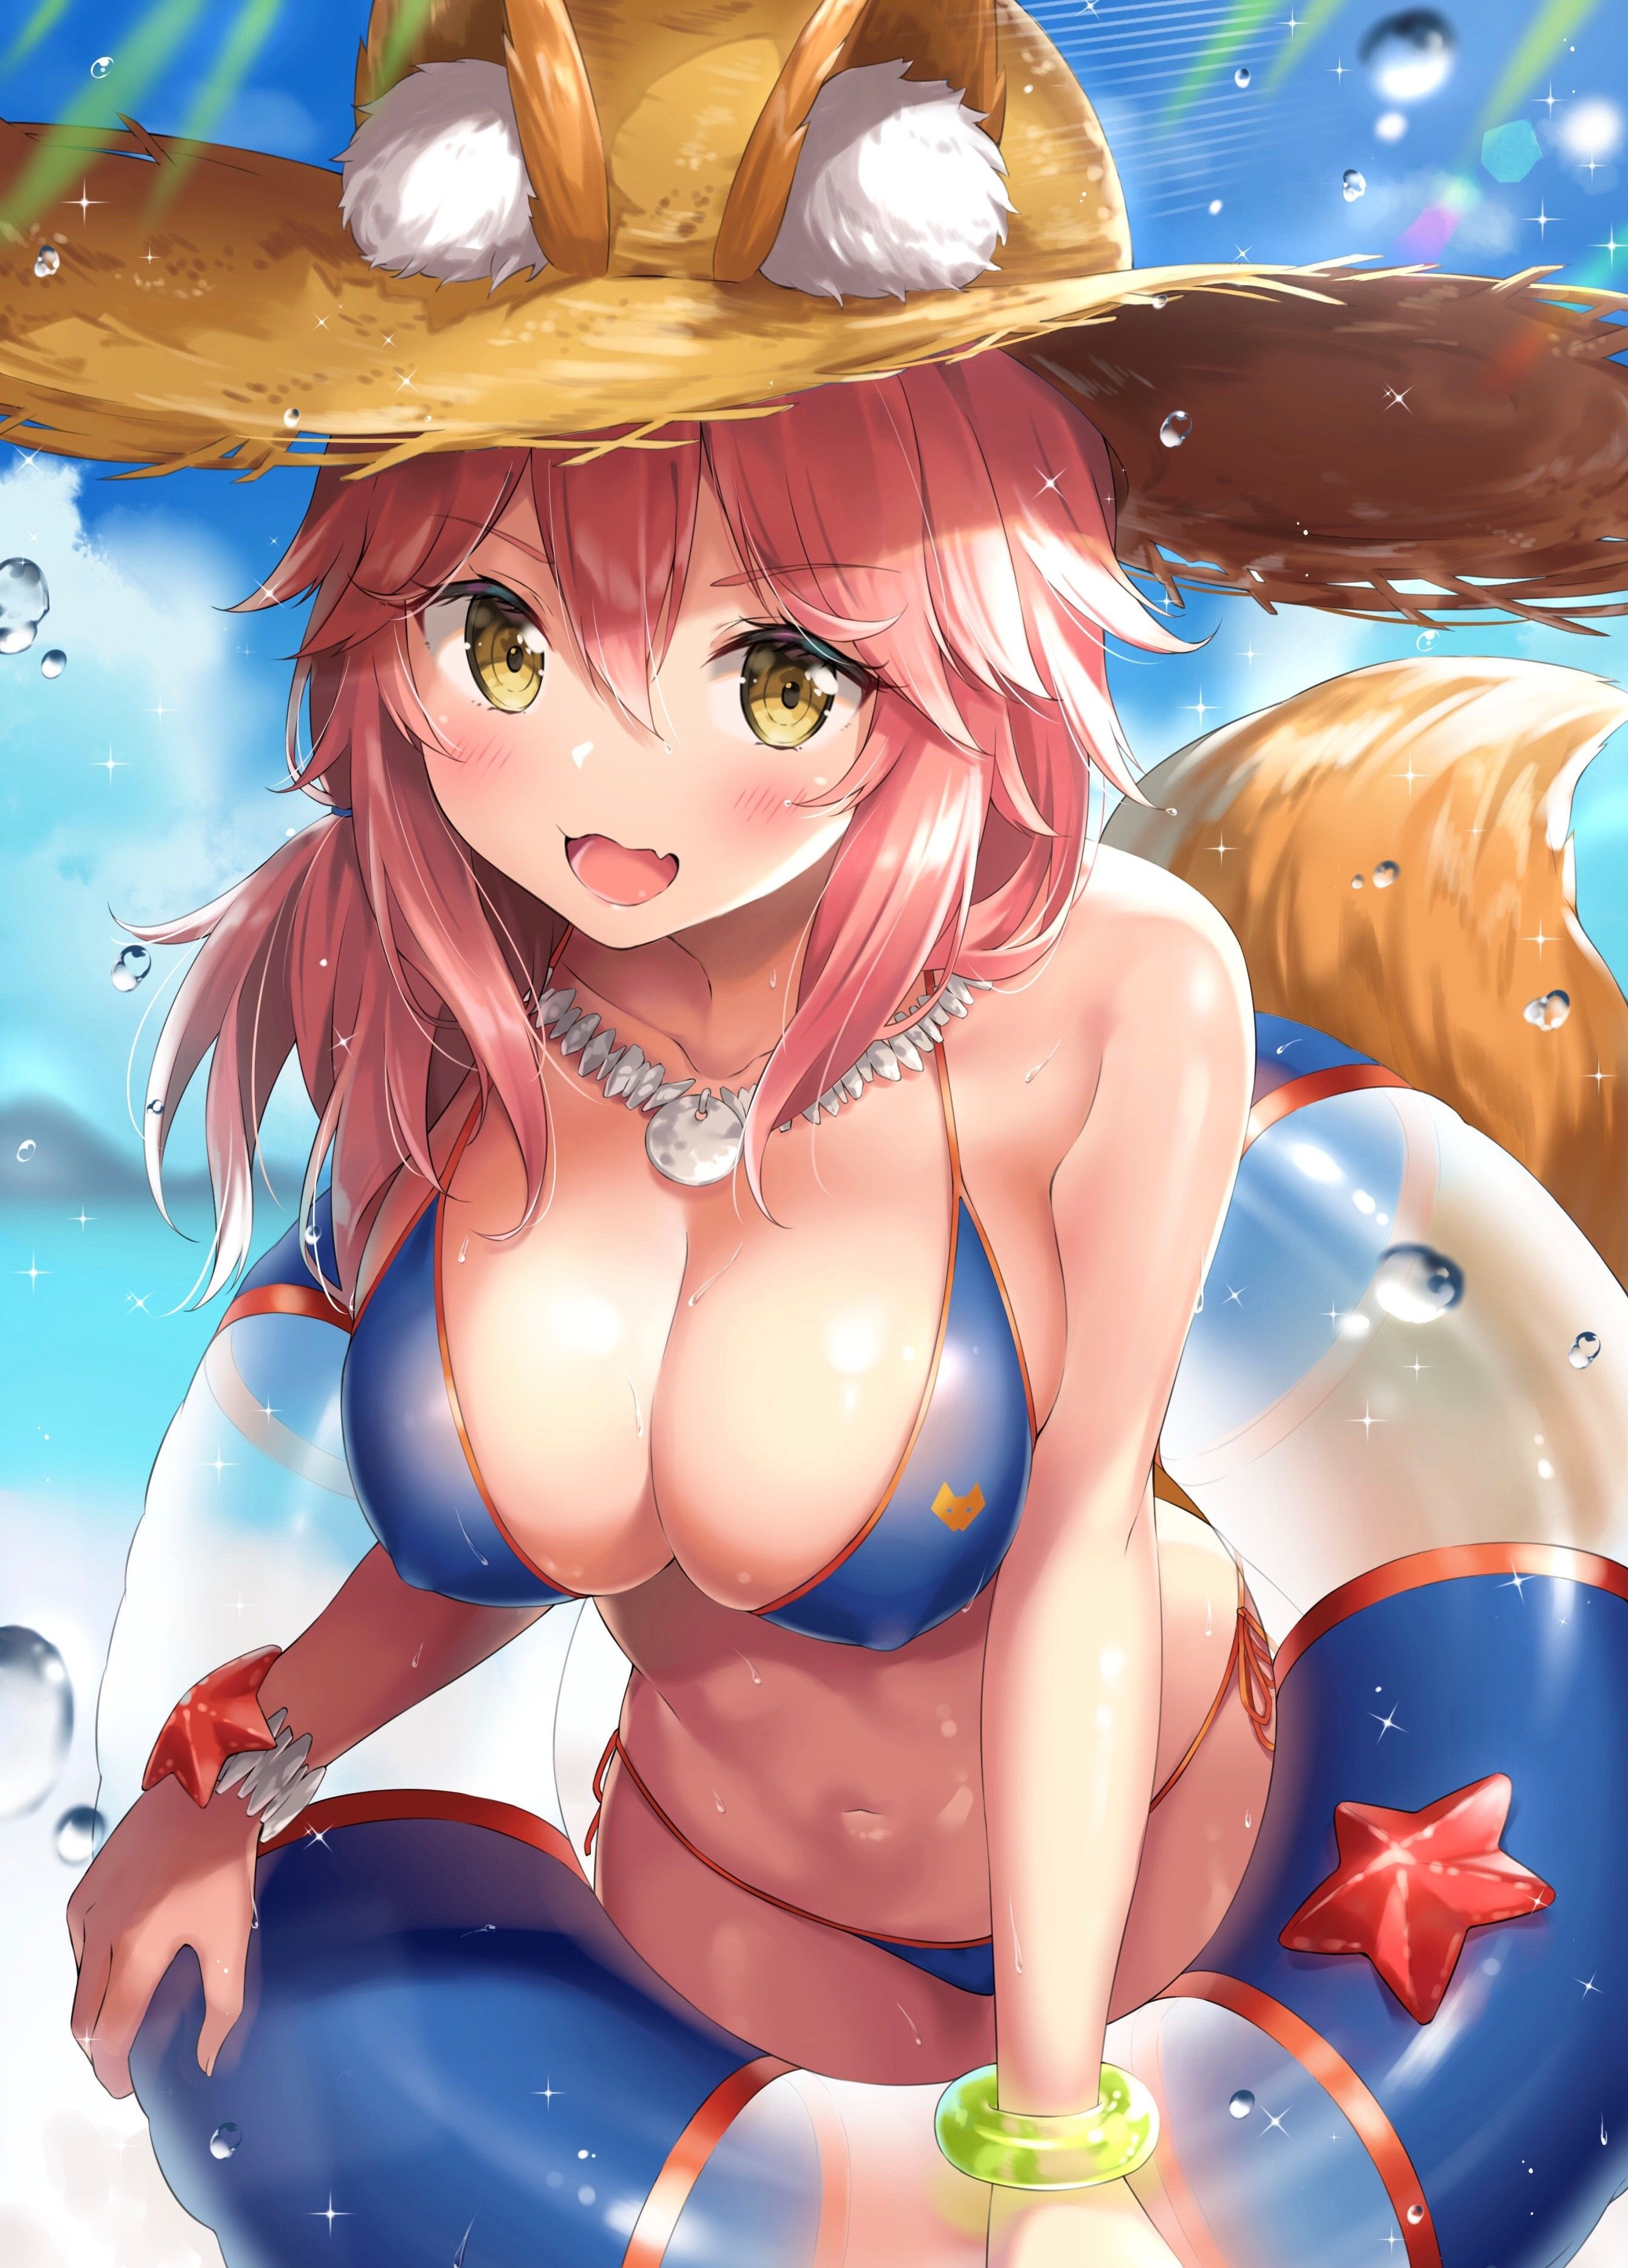 Voyeur Secondary Erotic Fate/Grand Order (Fate/extra), Cass Fox That Tamamo Before The Miko Image Summary! No.09 20 Sheets Latinas